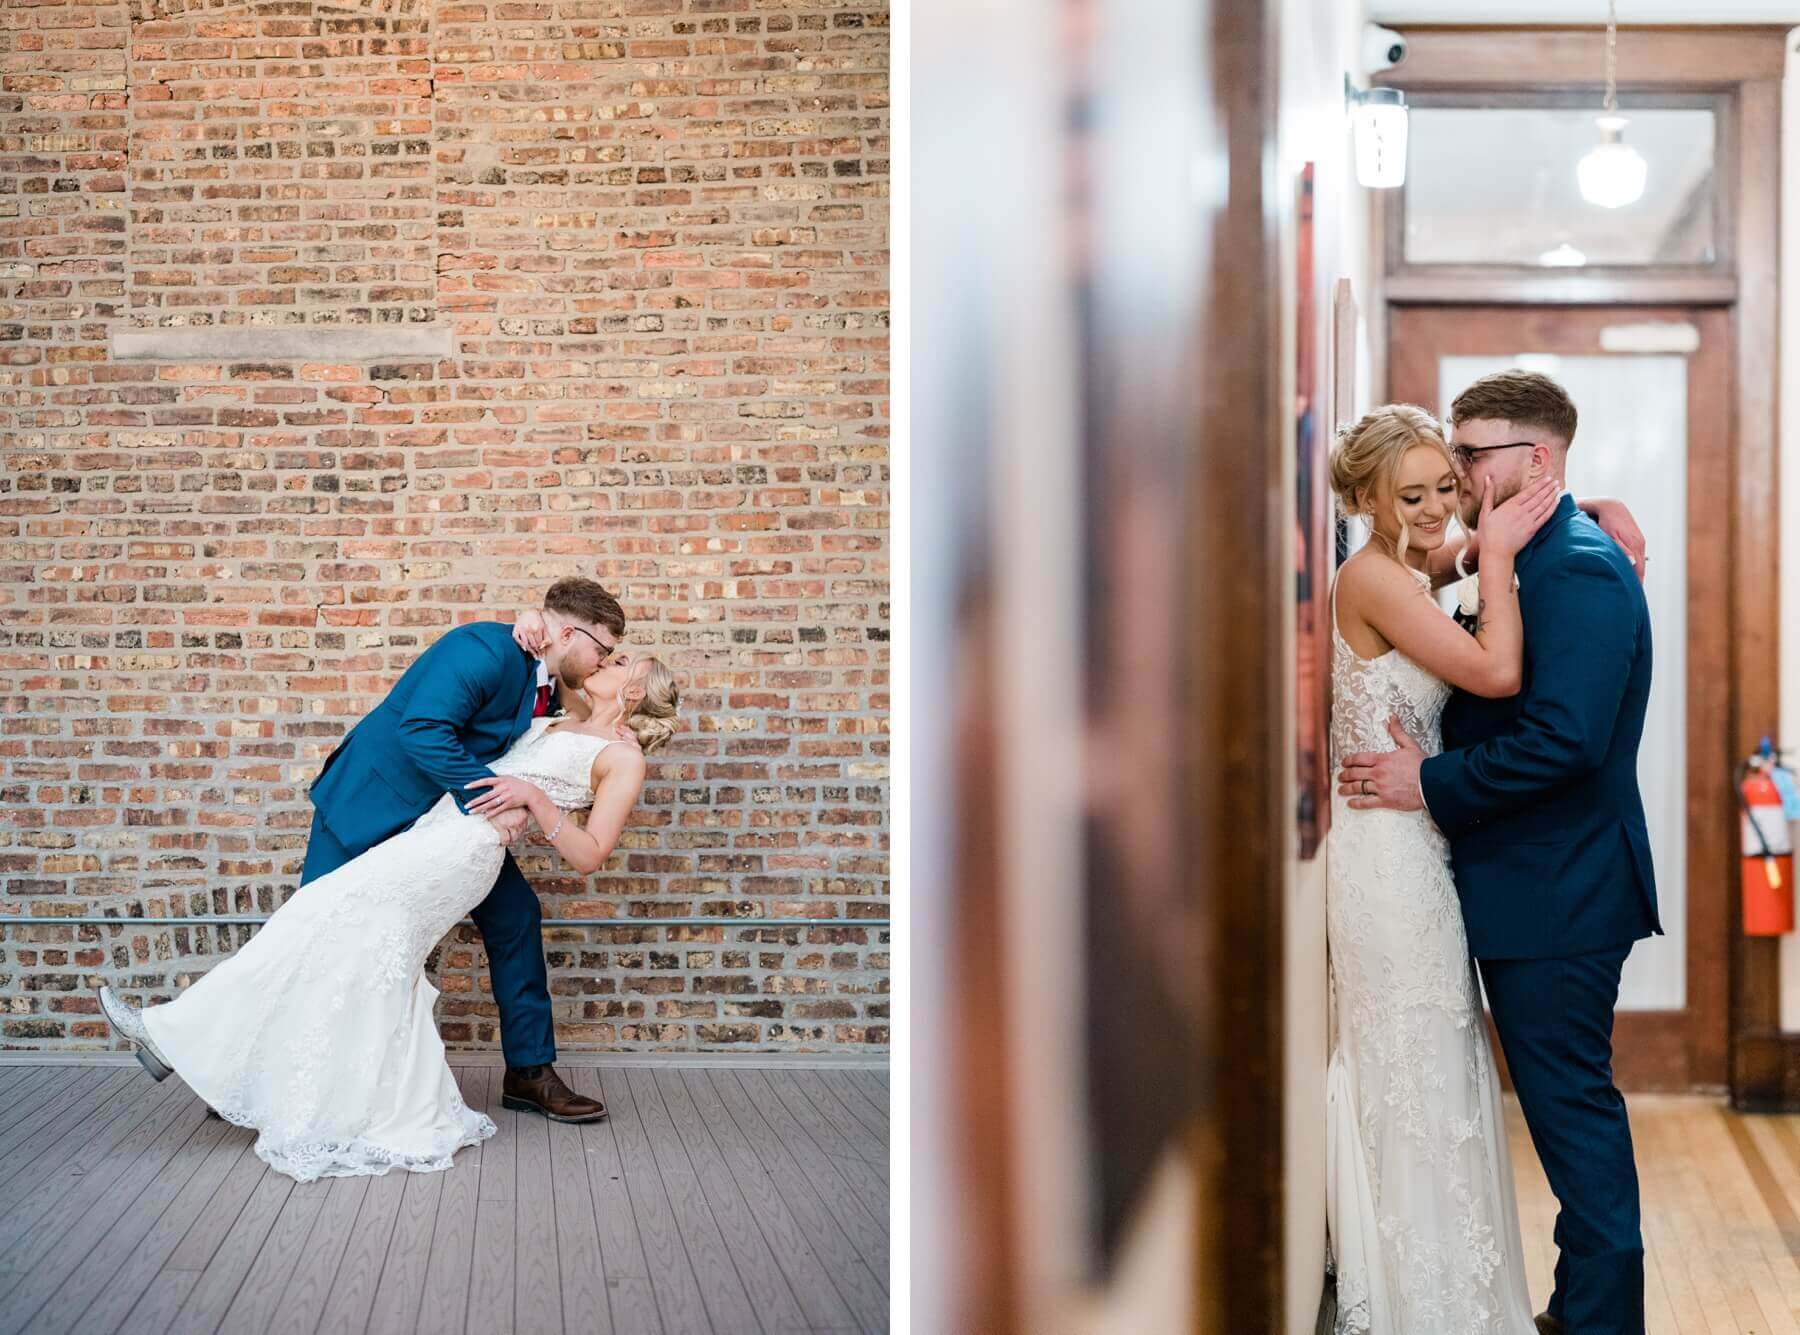 Groom dipping bride in front of brick wall | Groom kissing bride in hall at The Haight